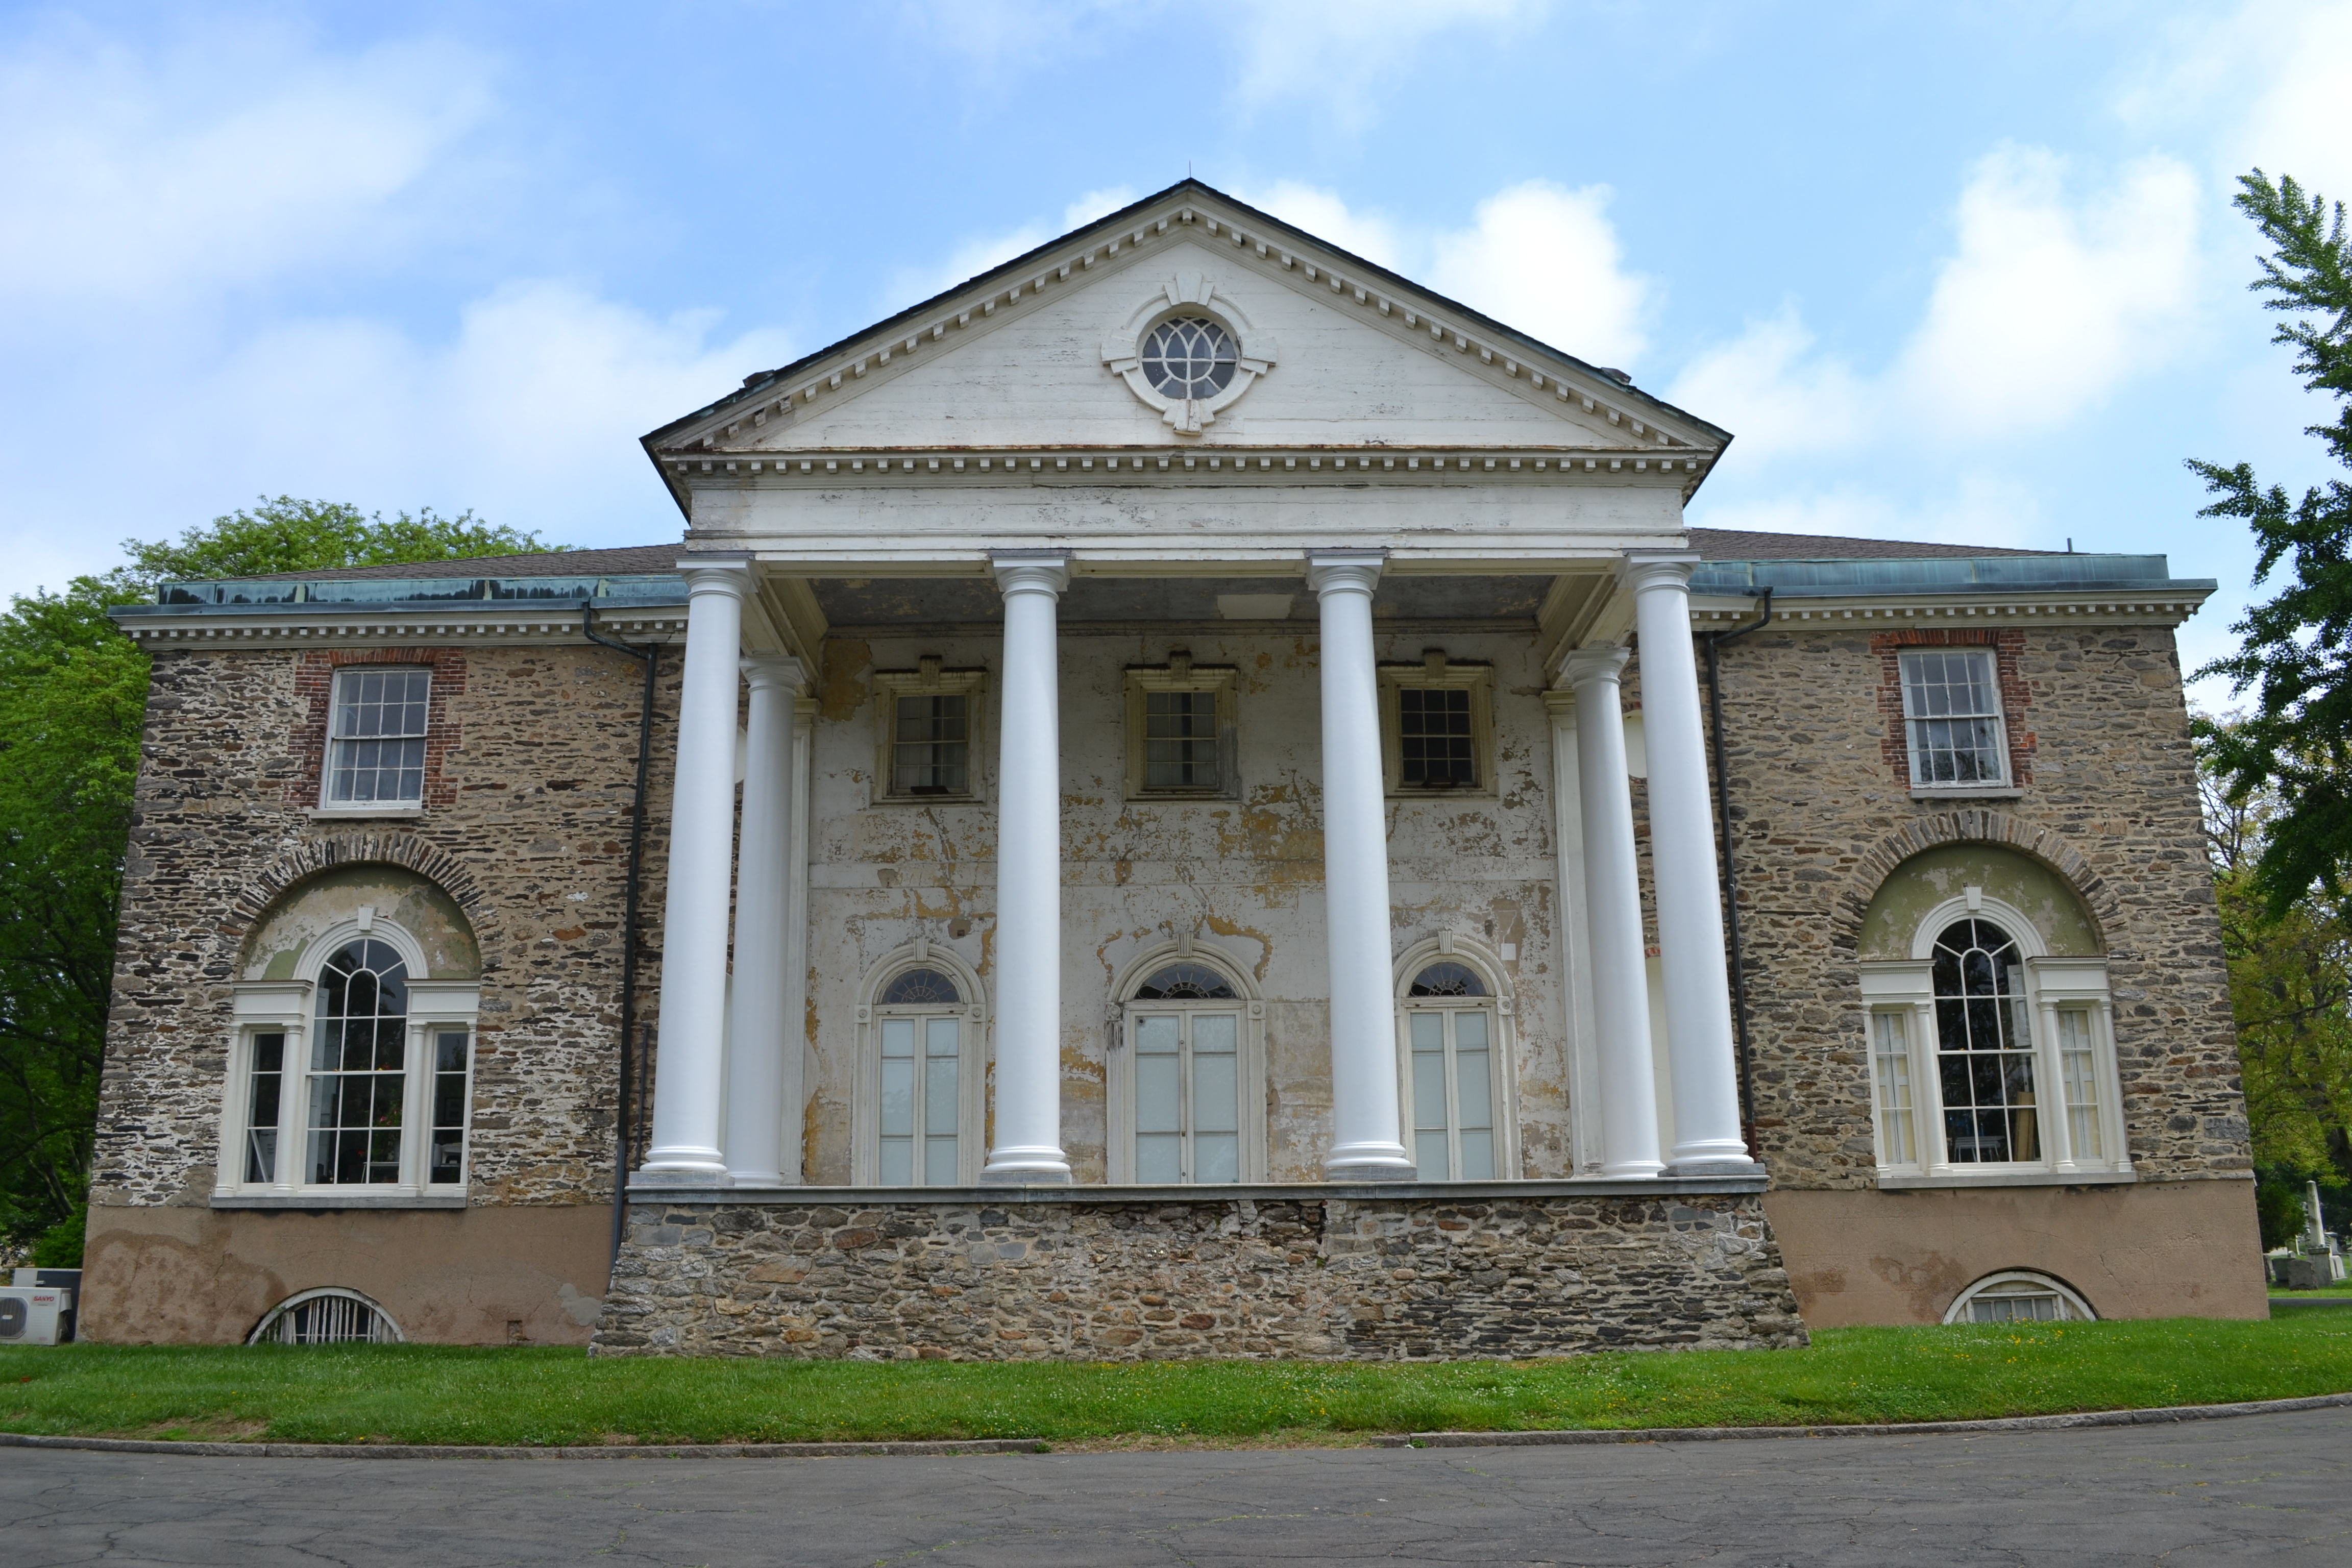 Hamilton's estate was the first example of Federal architecture in the country